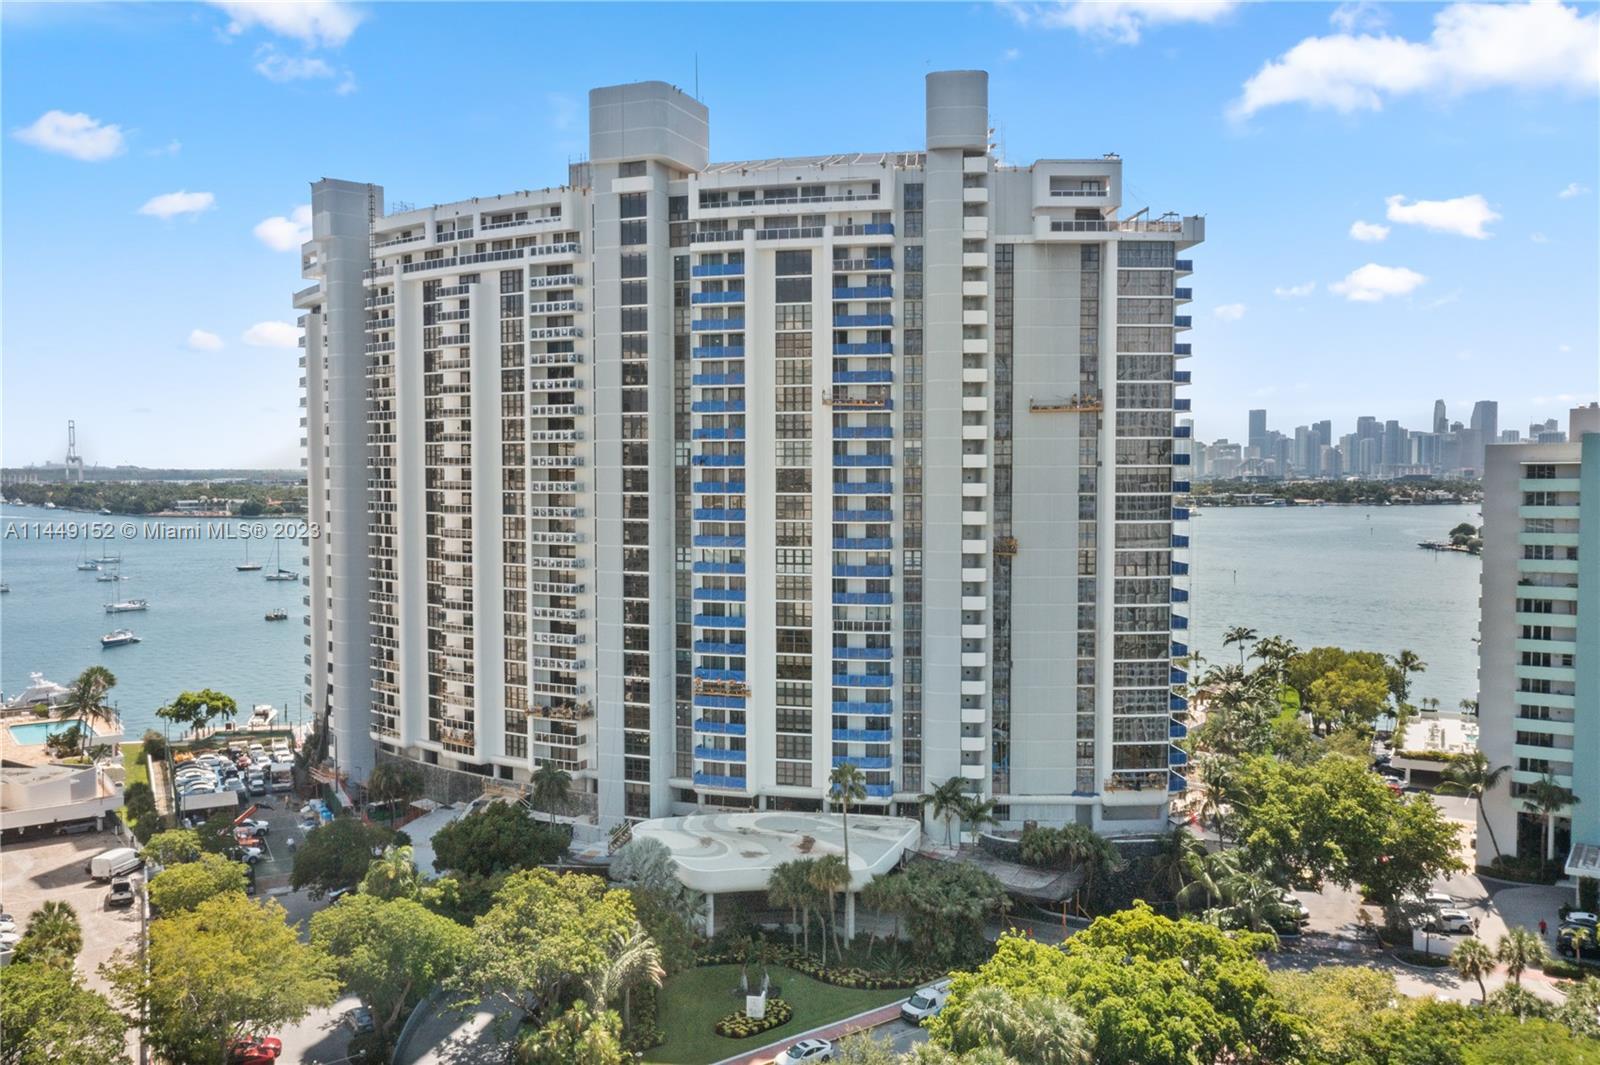 Don't miss out on the incredible opportunity to purchase a 1,477 SF 3 bedroom/2 bathroom condo at th